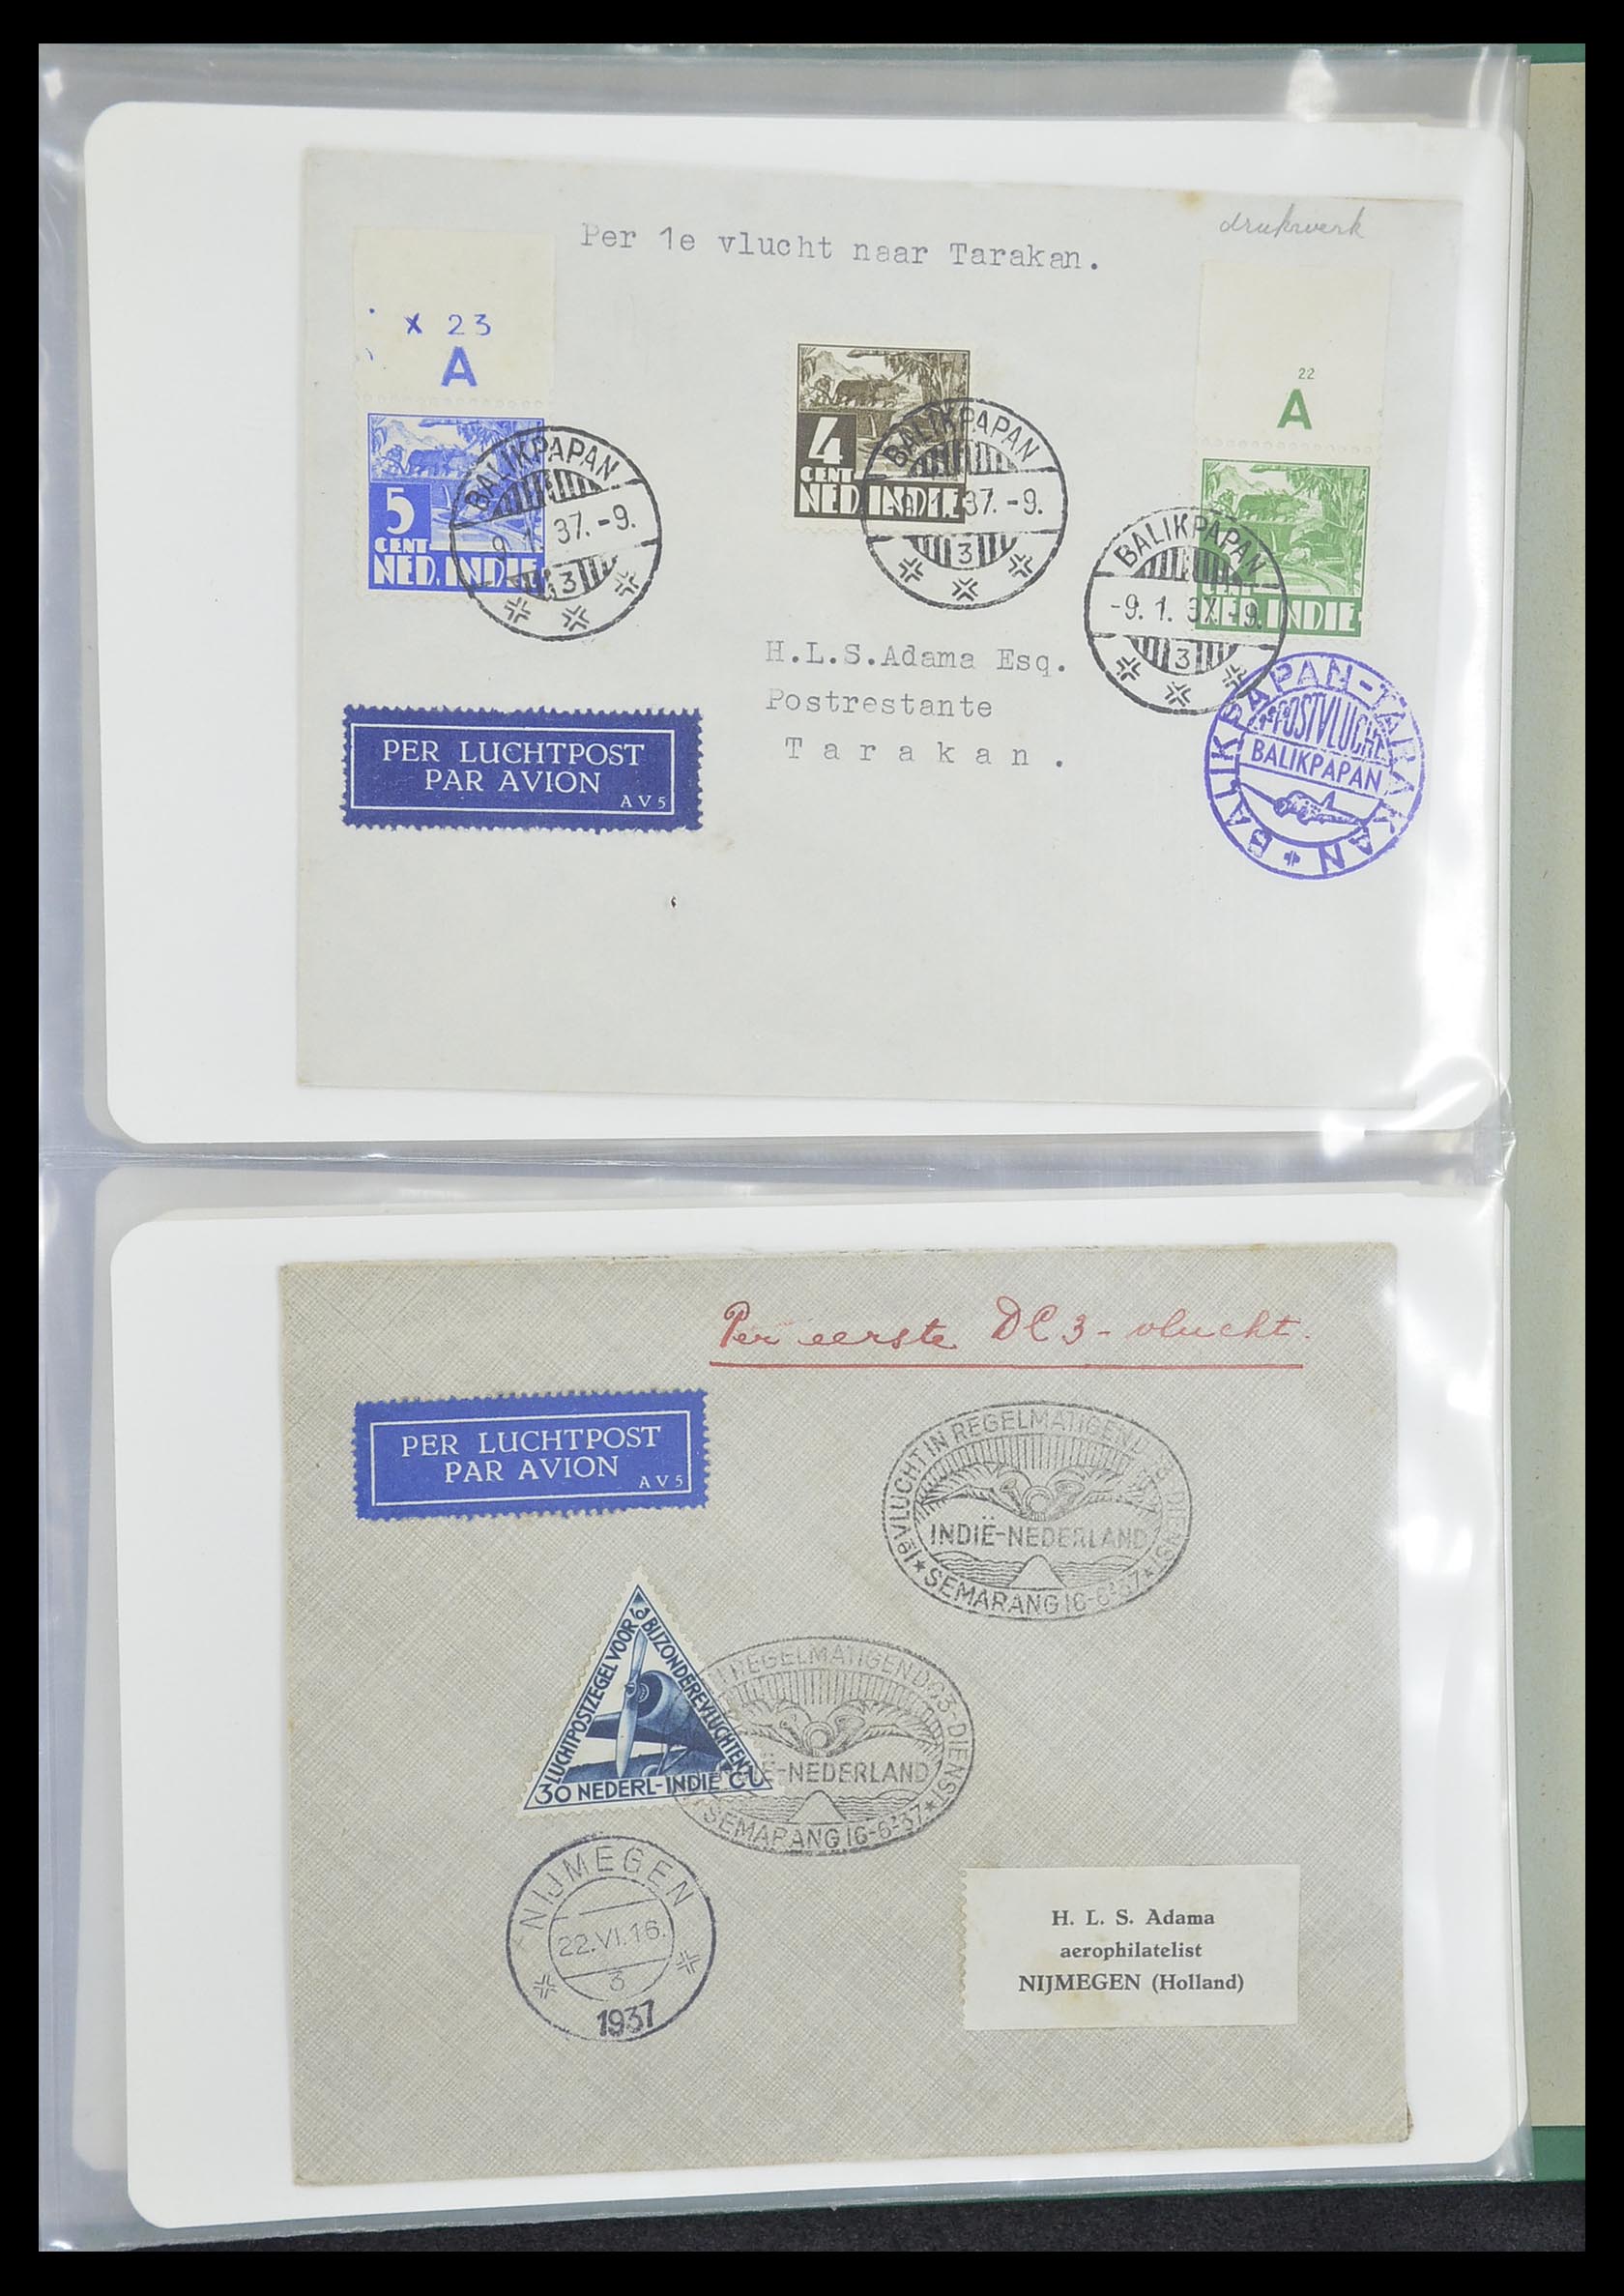 33333 028 - Stamp collection 33333 Dutch territories covers 1873-1959.